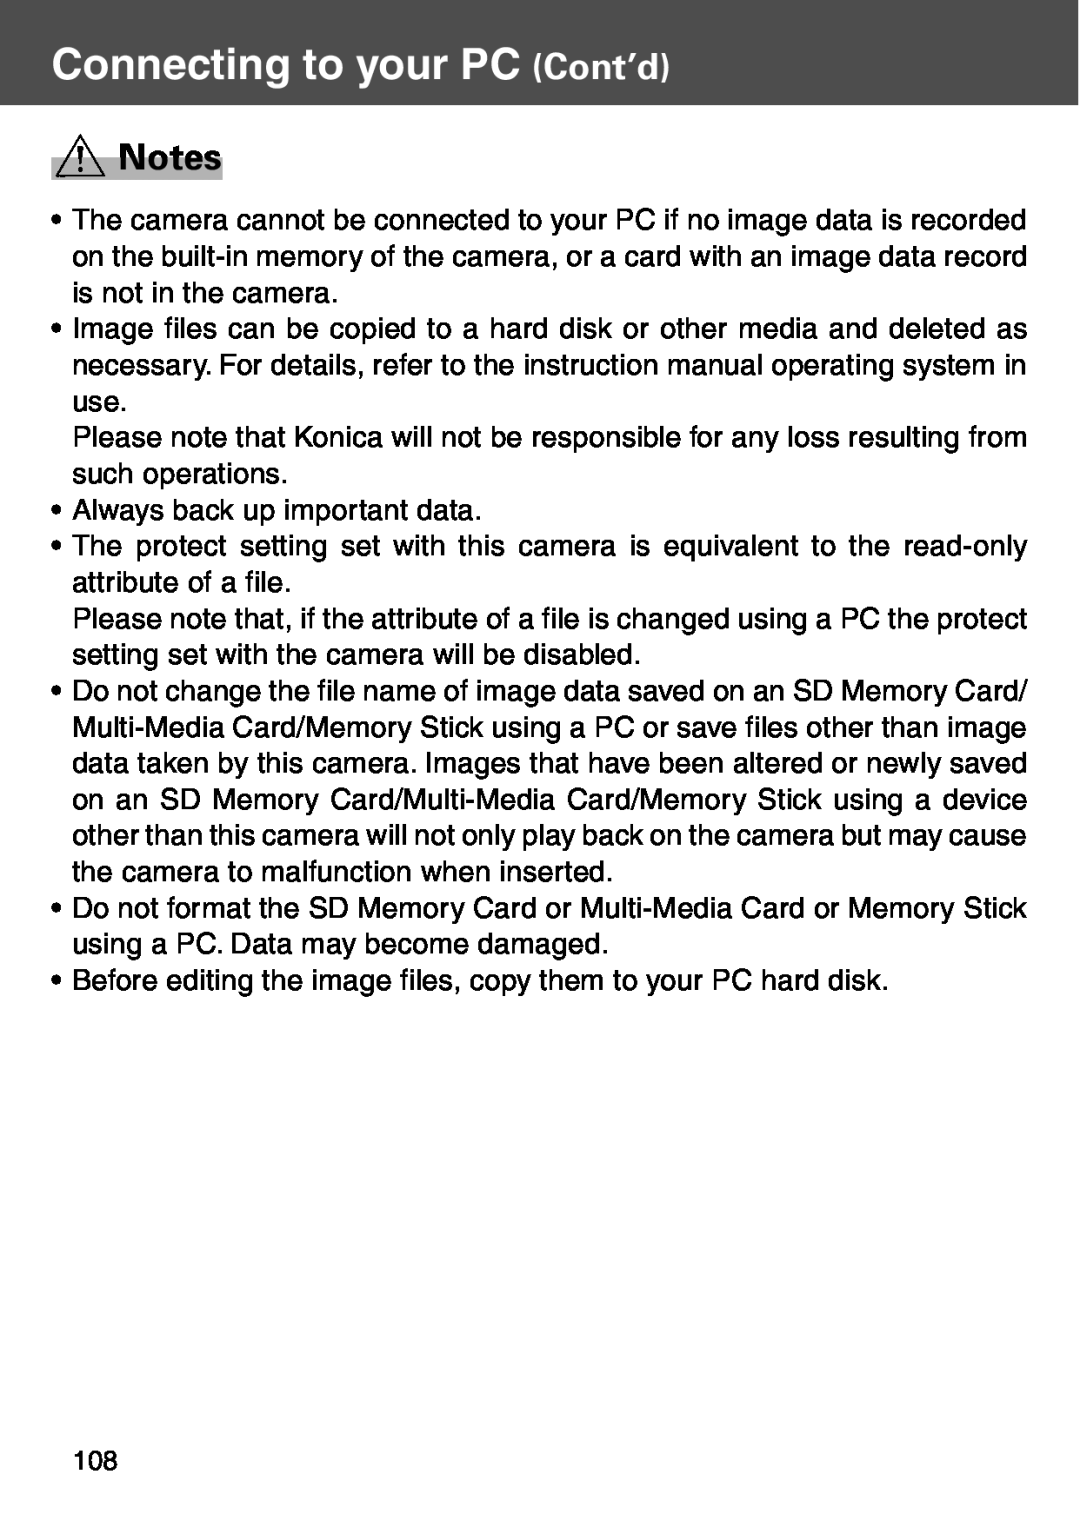 Konica Minolta KD-500Z user manual Connecting to your PC Cont’d, Always back up important data 